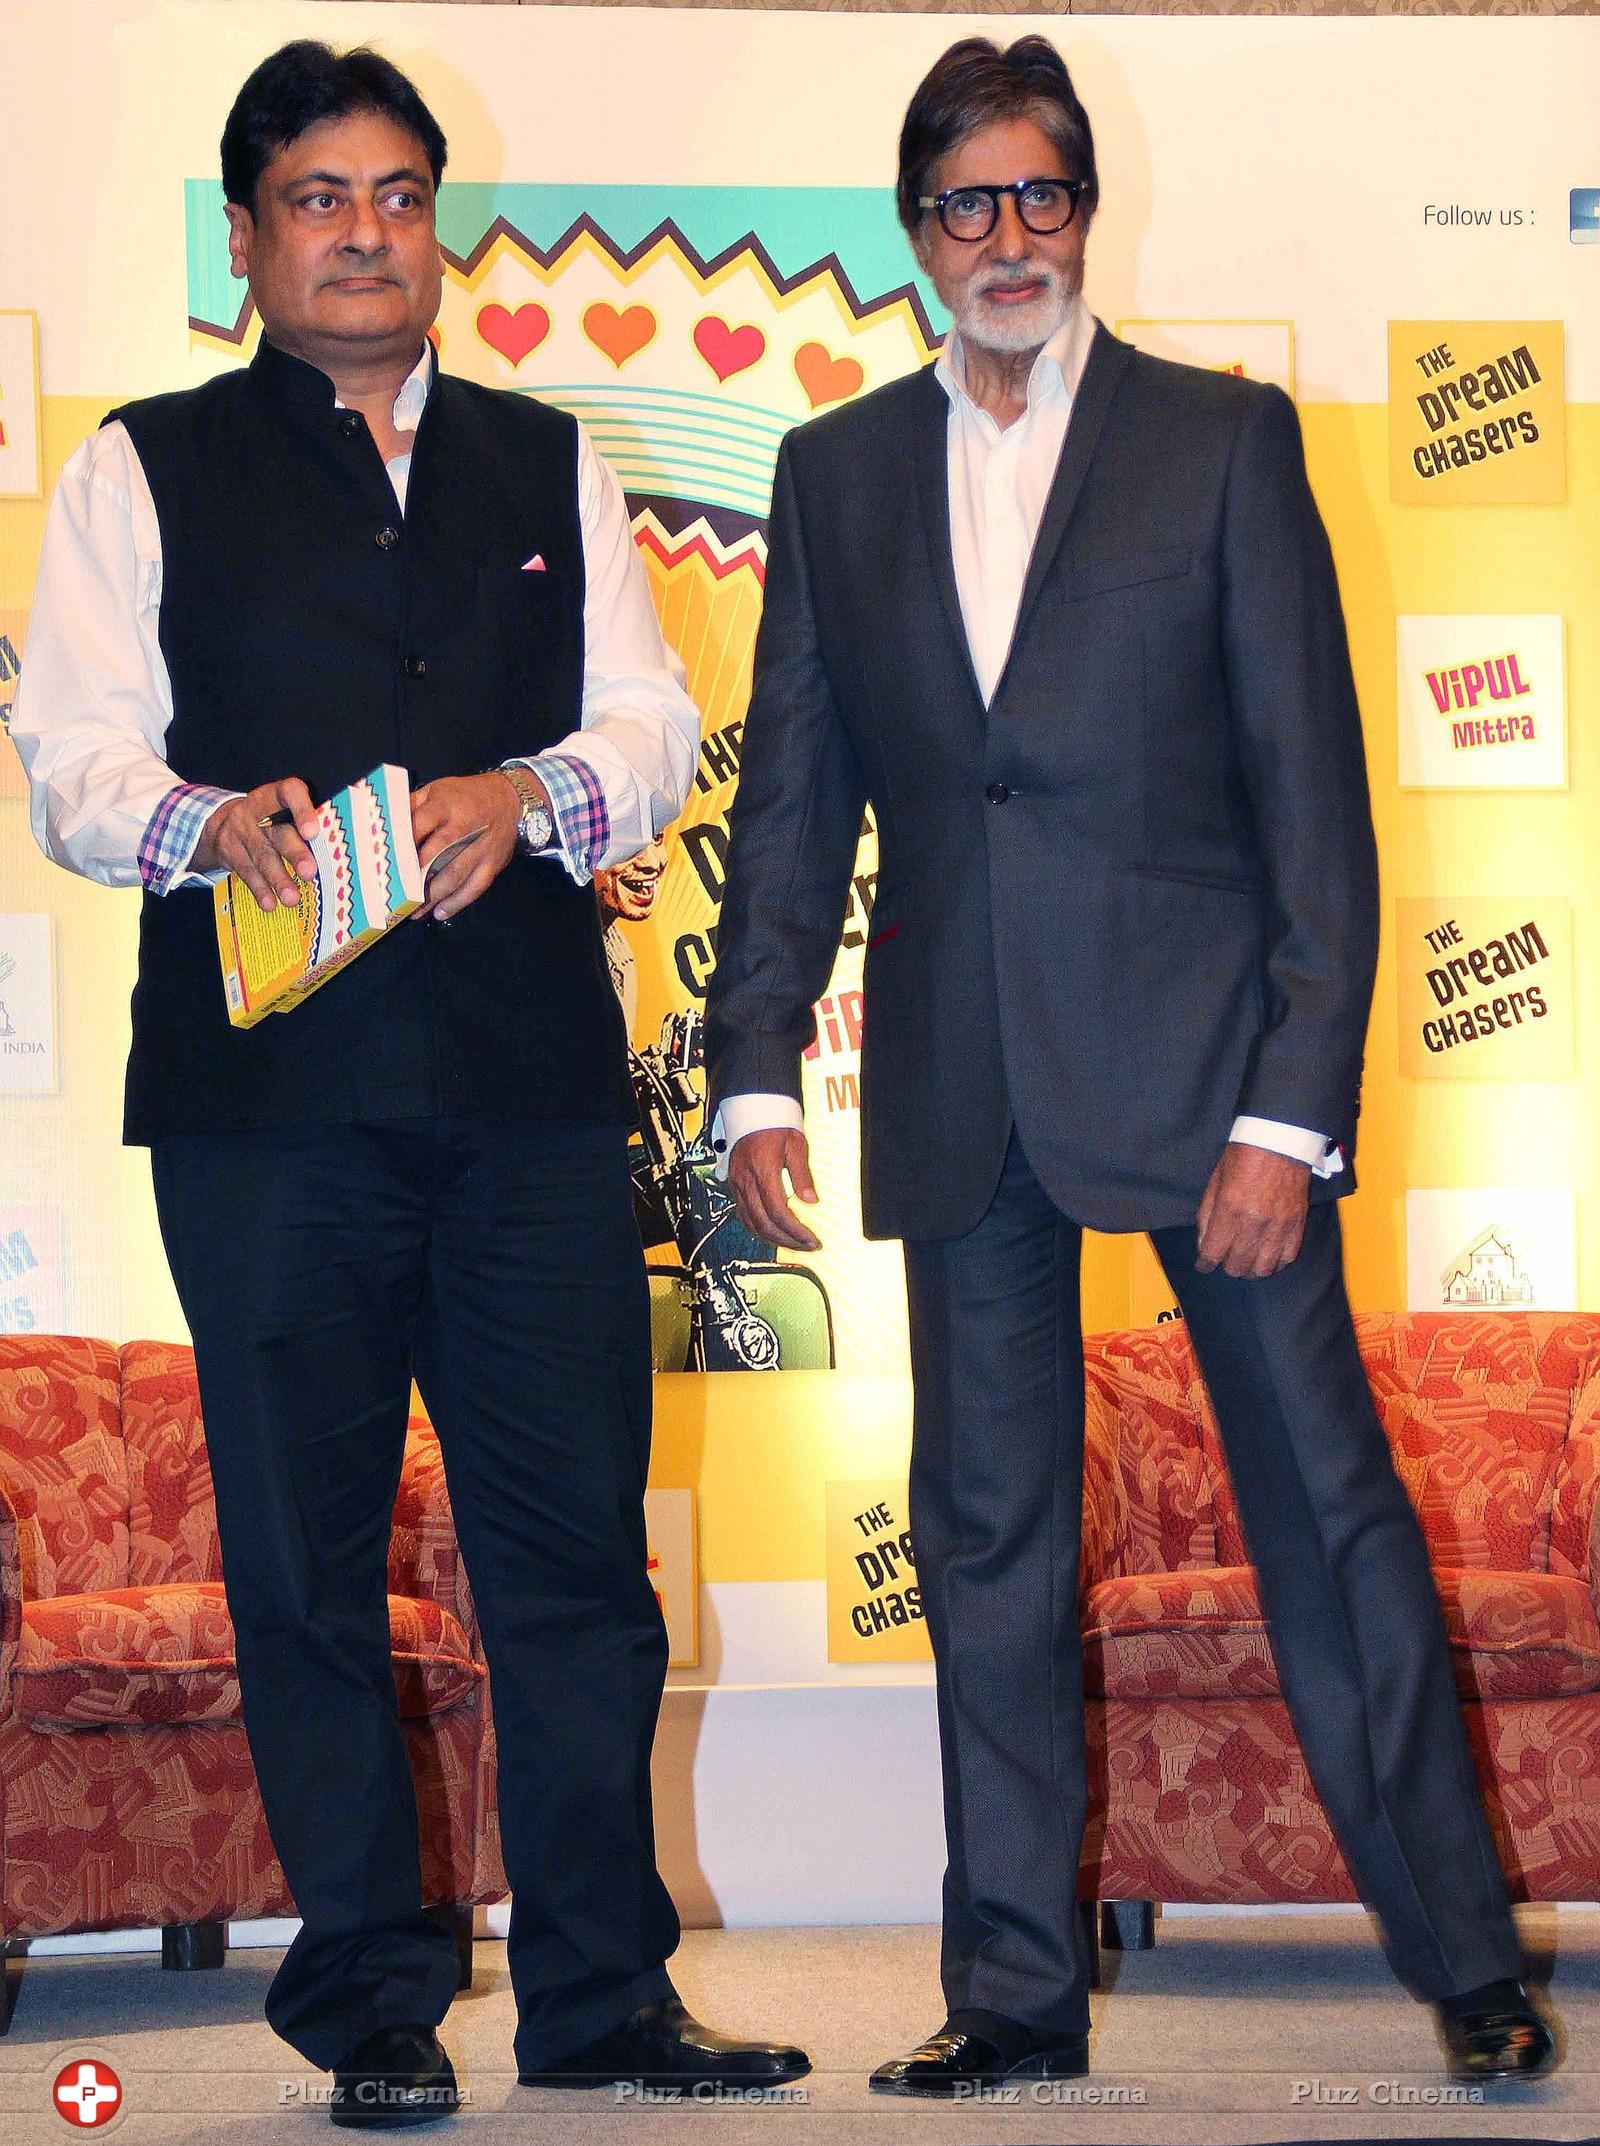 Amitabh launches Vipul Mittra's book The Dream Chaser Photos | Picture 585967